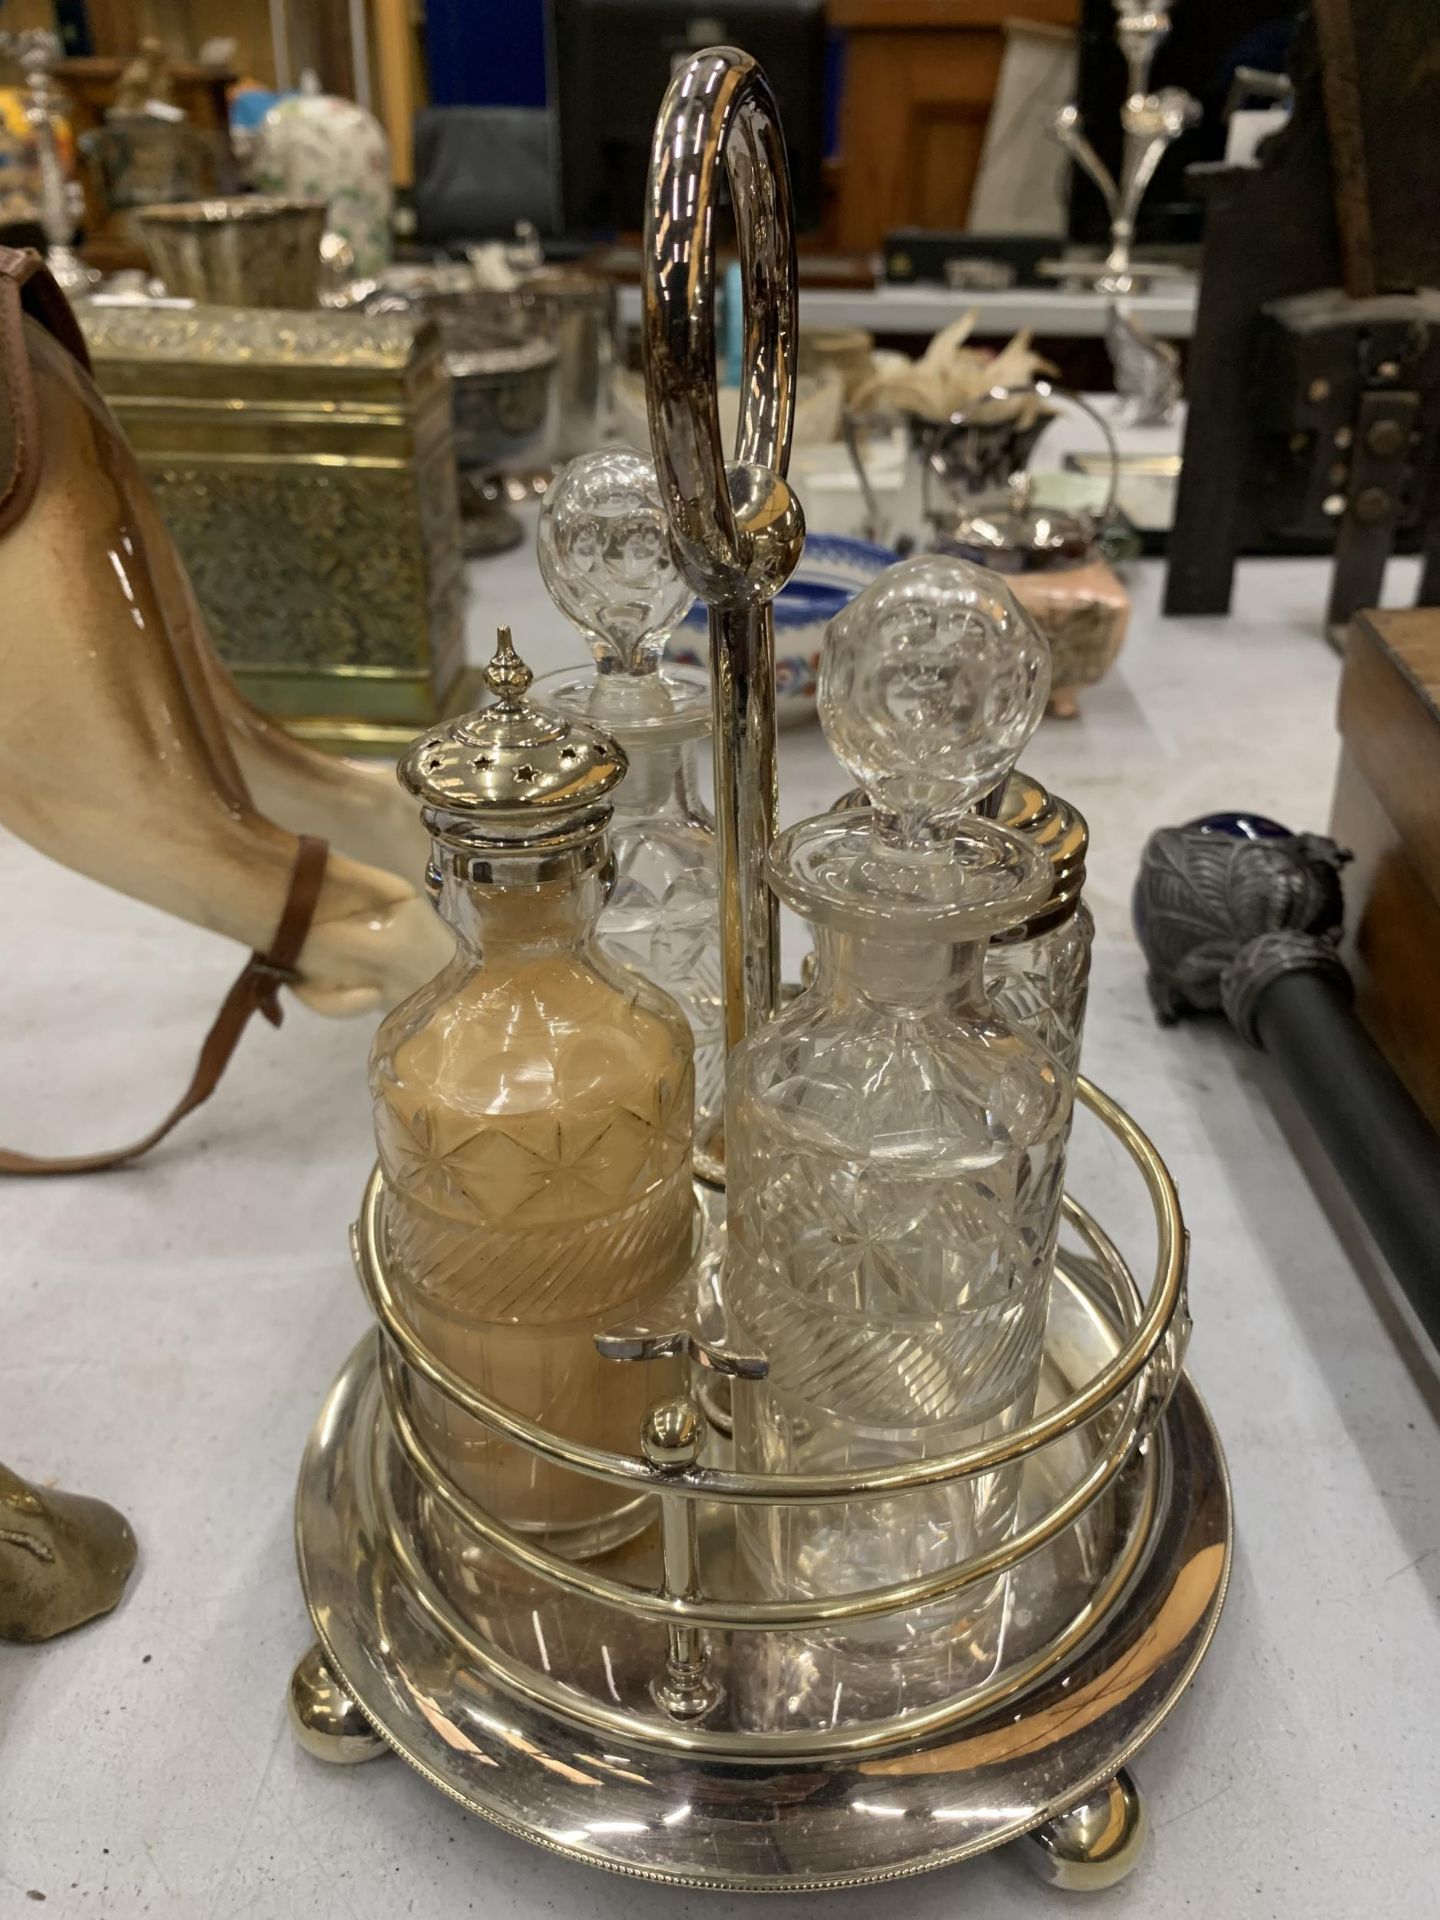 A QUANTITY OF SILVER PLATE AND GLASS CONDIMENTS TO INCLUDE A SUGAR SHAKER, PRESERVE POT, ETC - Image 5 of 5